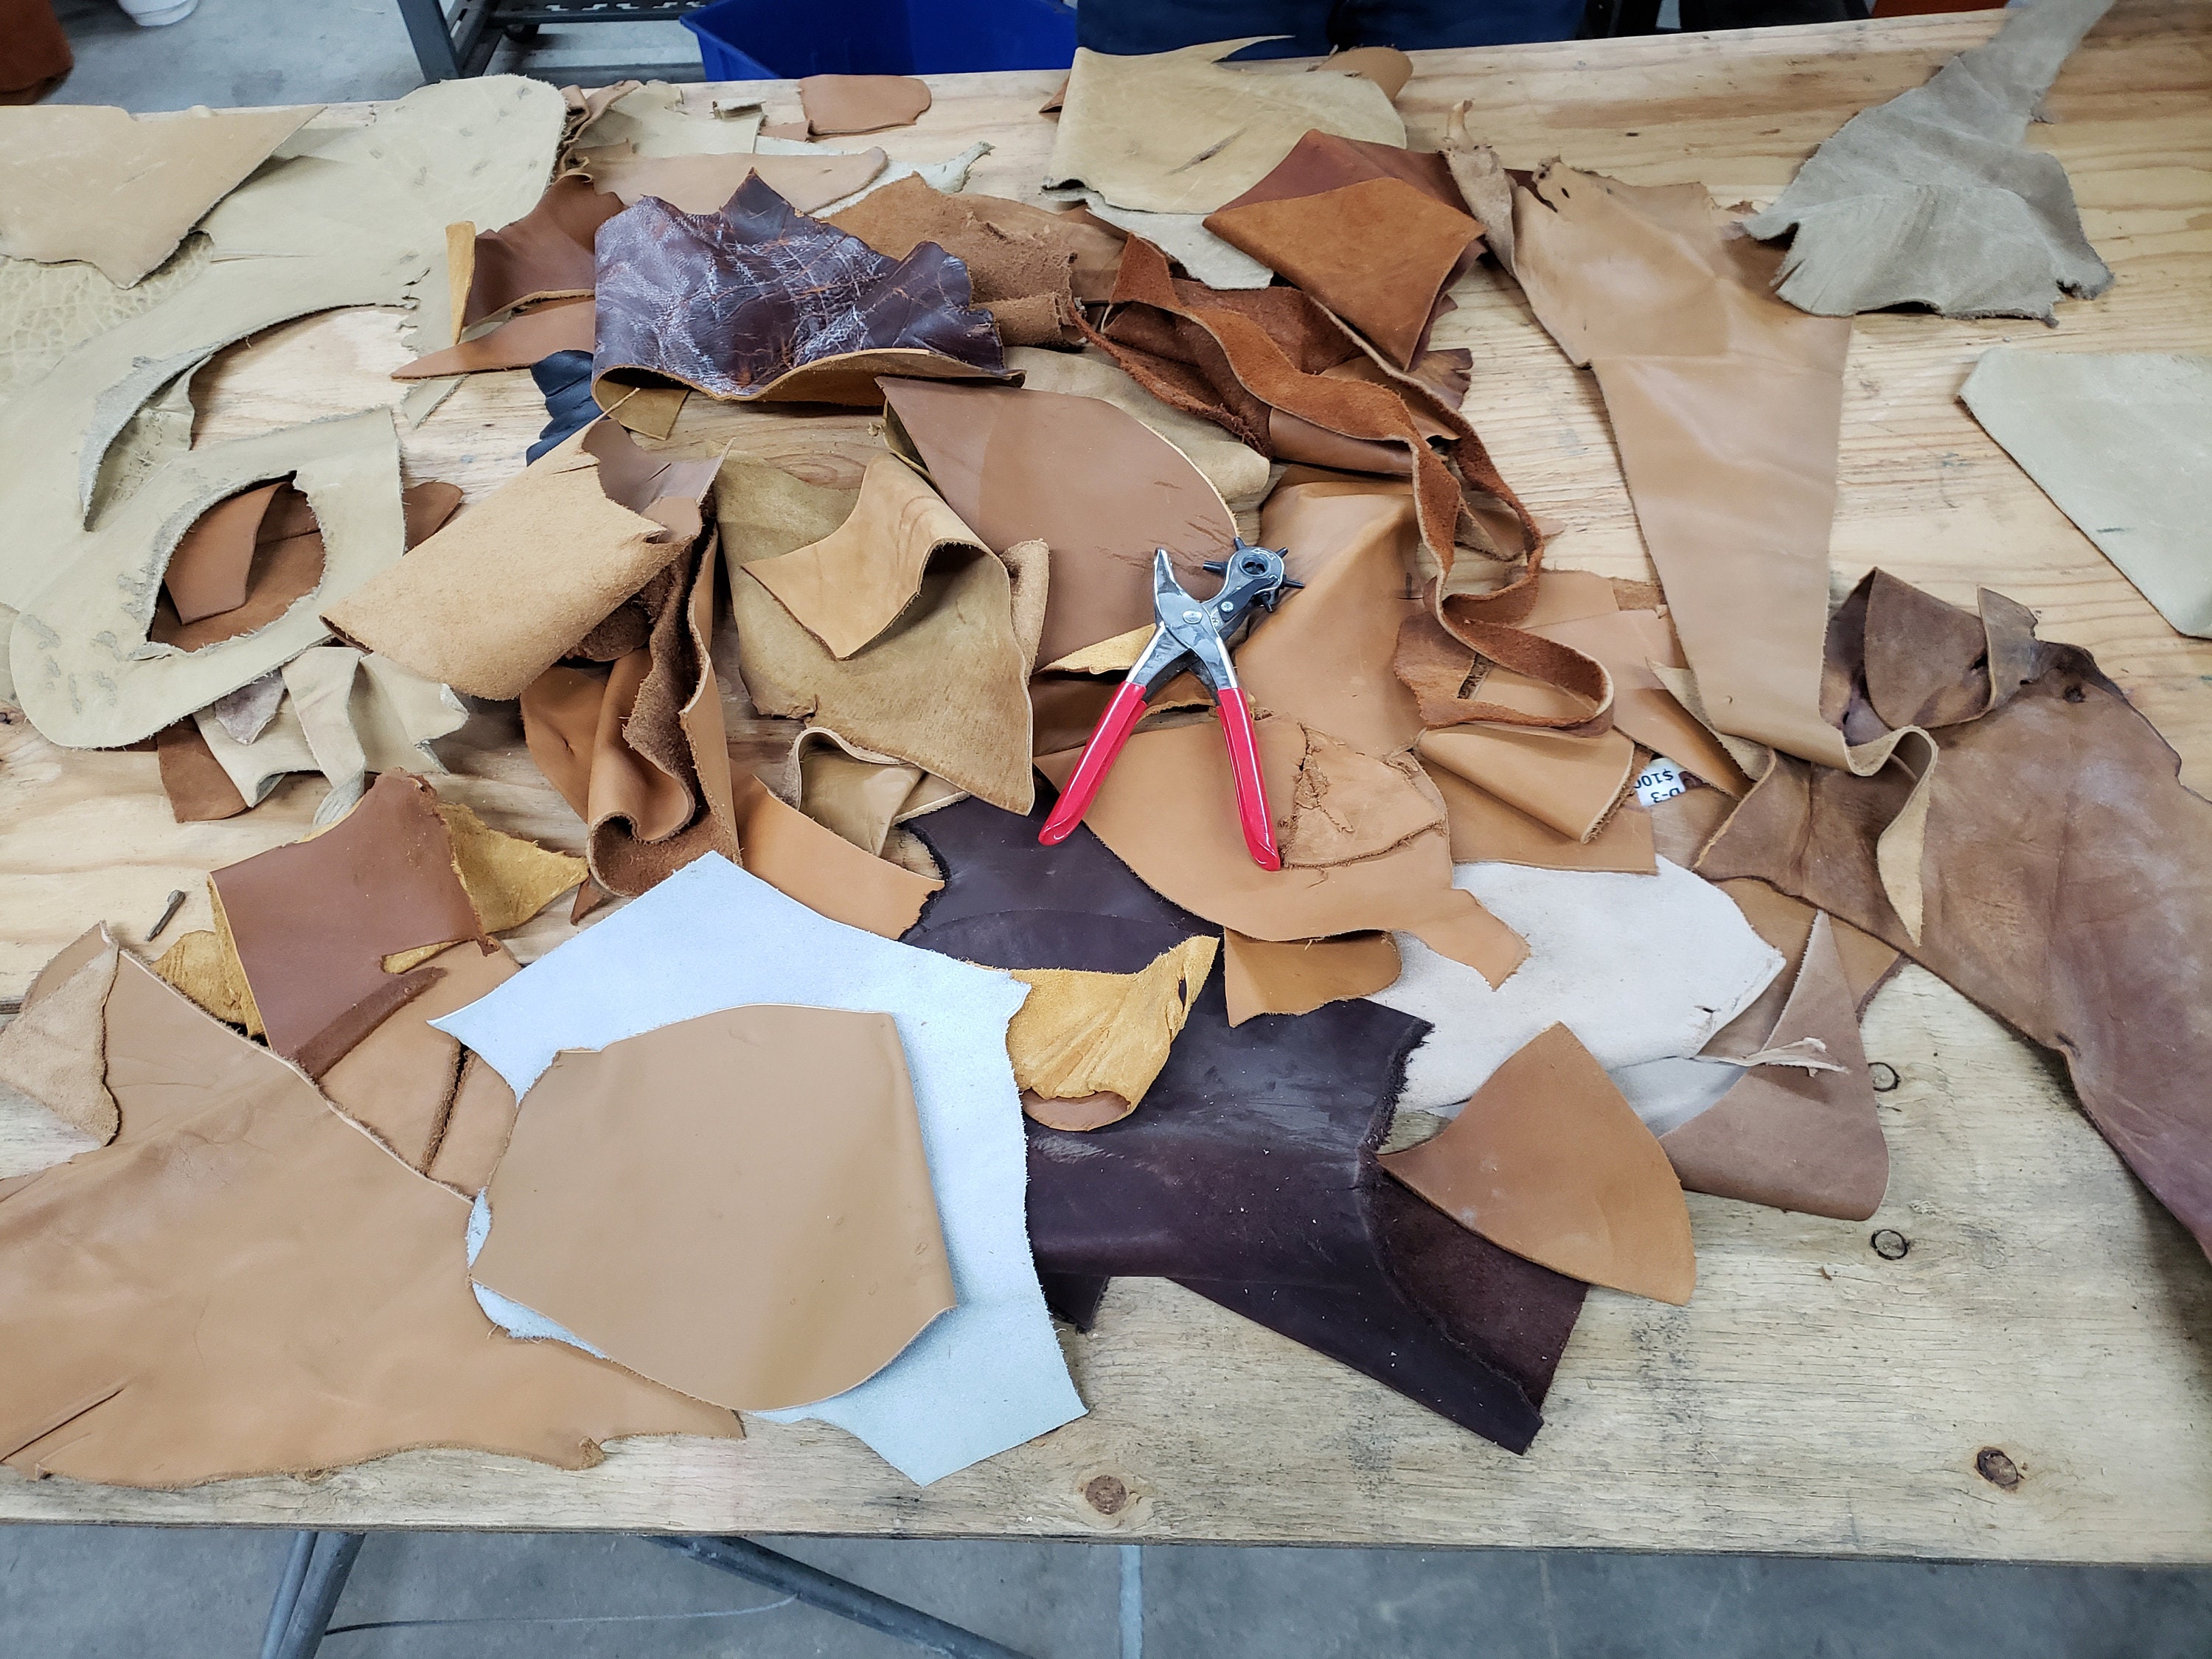 A4 Natural Leather Sheet Cowhide Leather, Genuine Leather Sheets Leather  Scrap, Leather Piece, Tanned Leather, Leather Supplies 